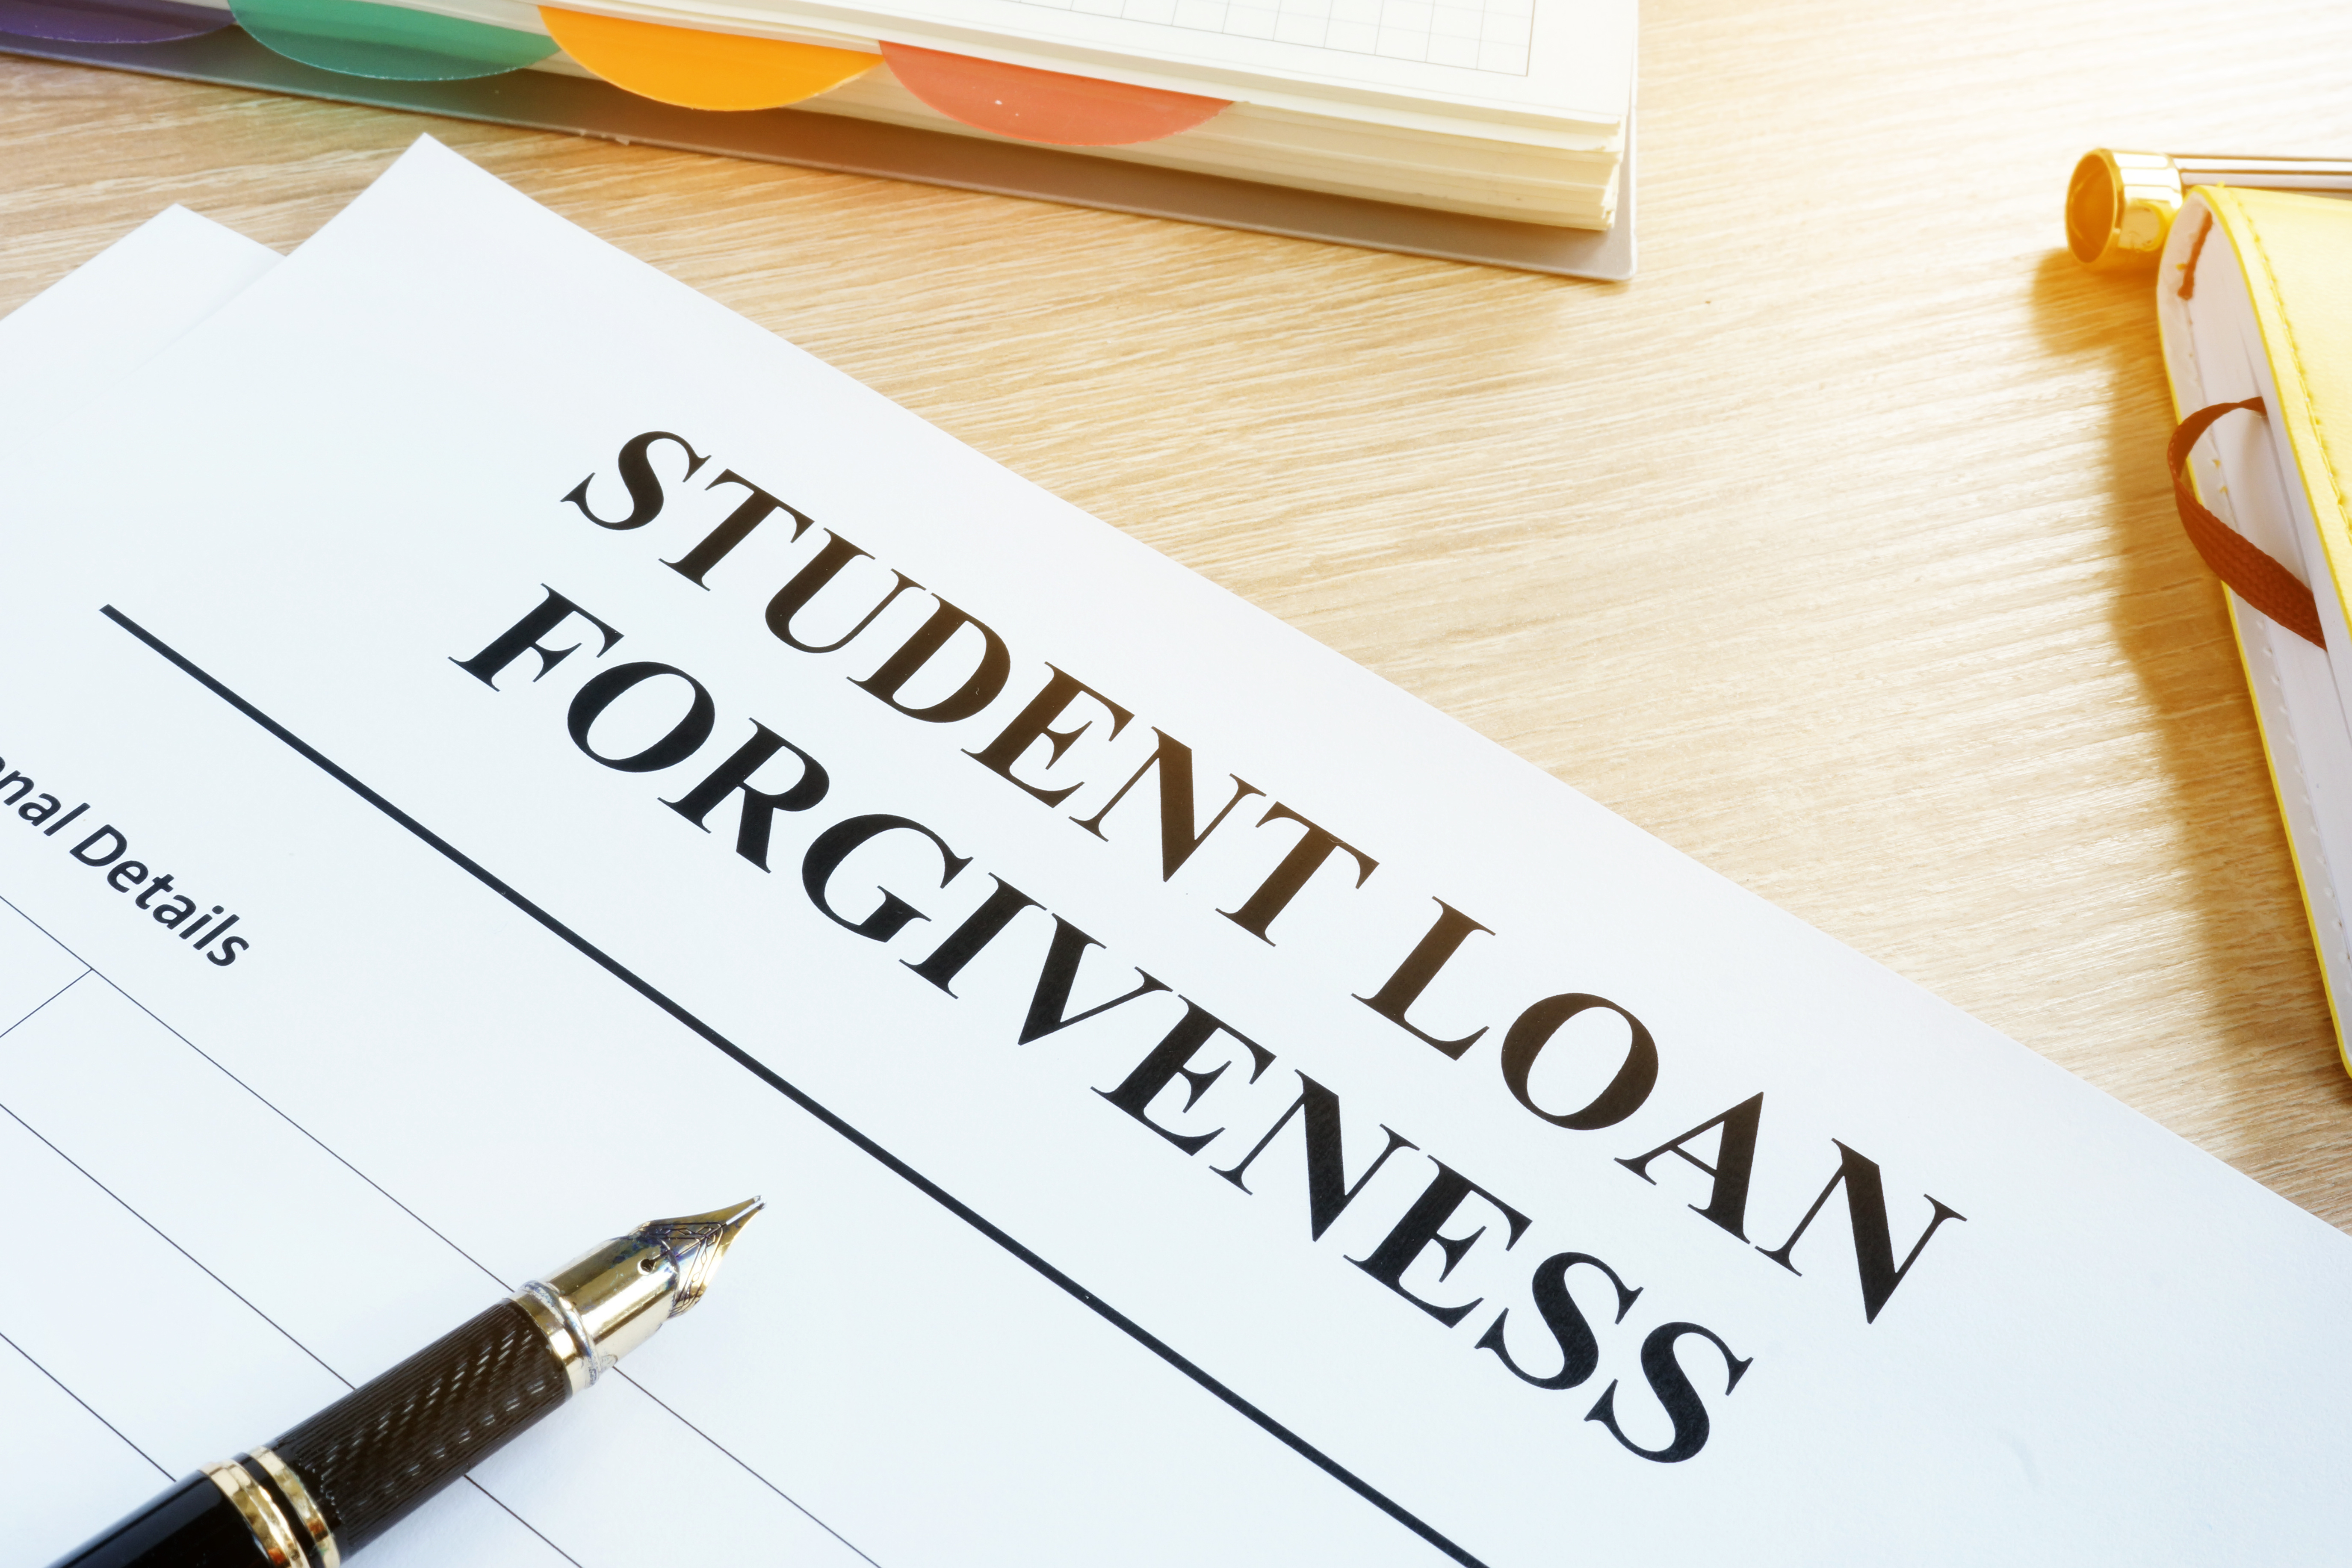 Learn everything about student loan forgiveness and check if you qualify for it! Source: Adobe Stock.